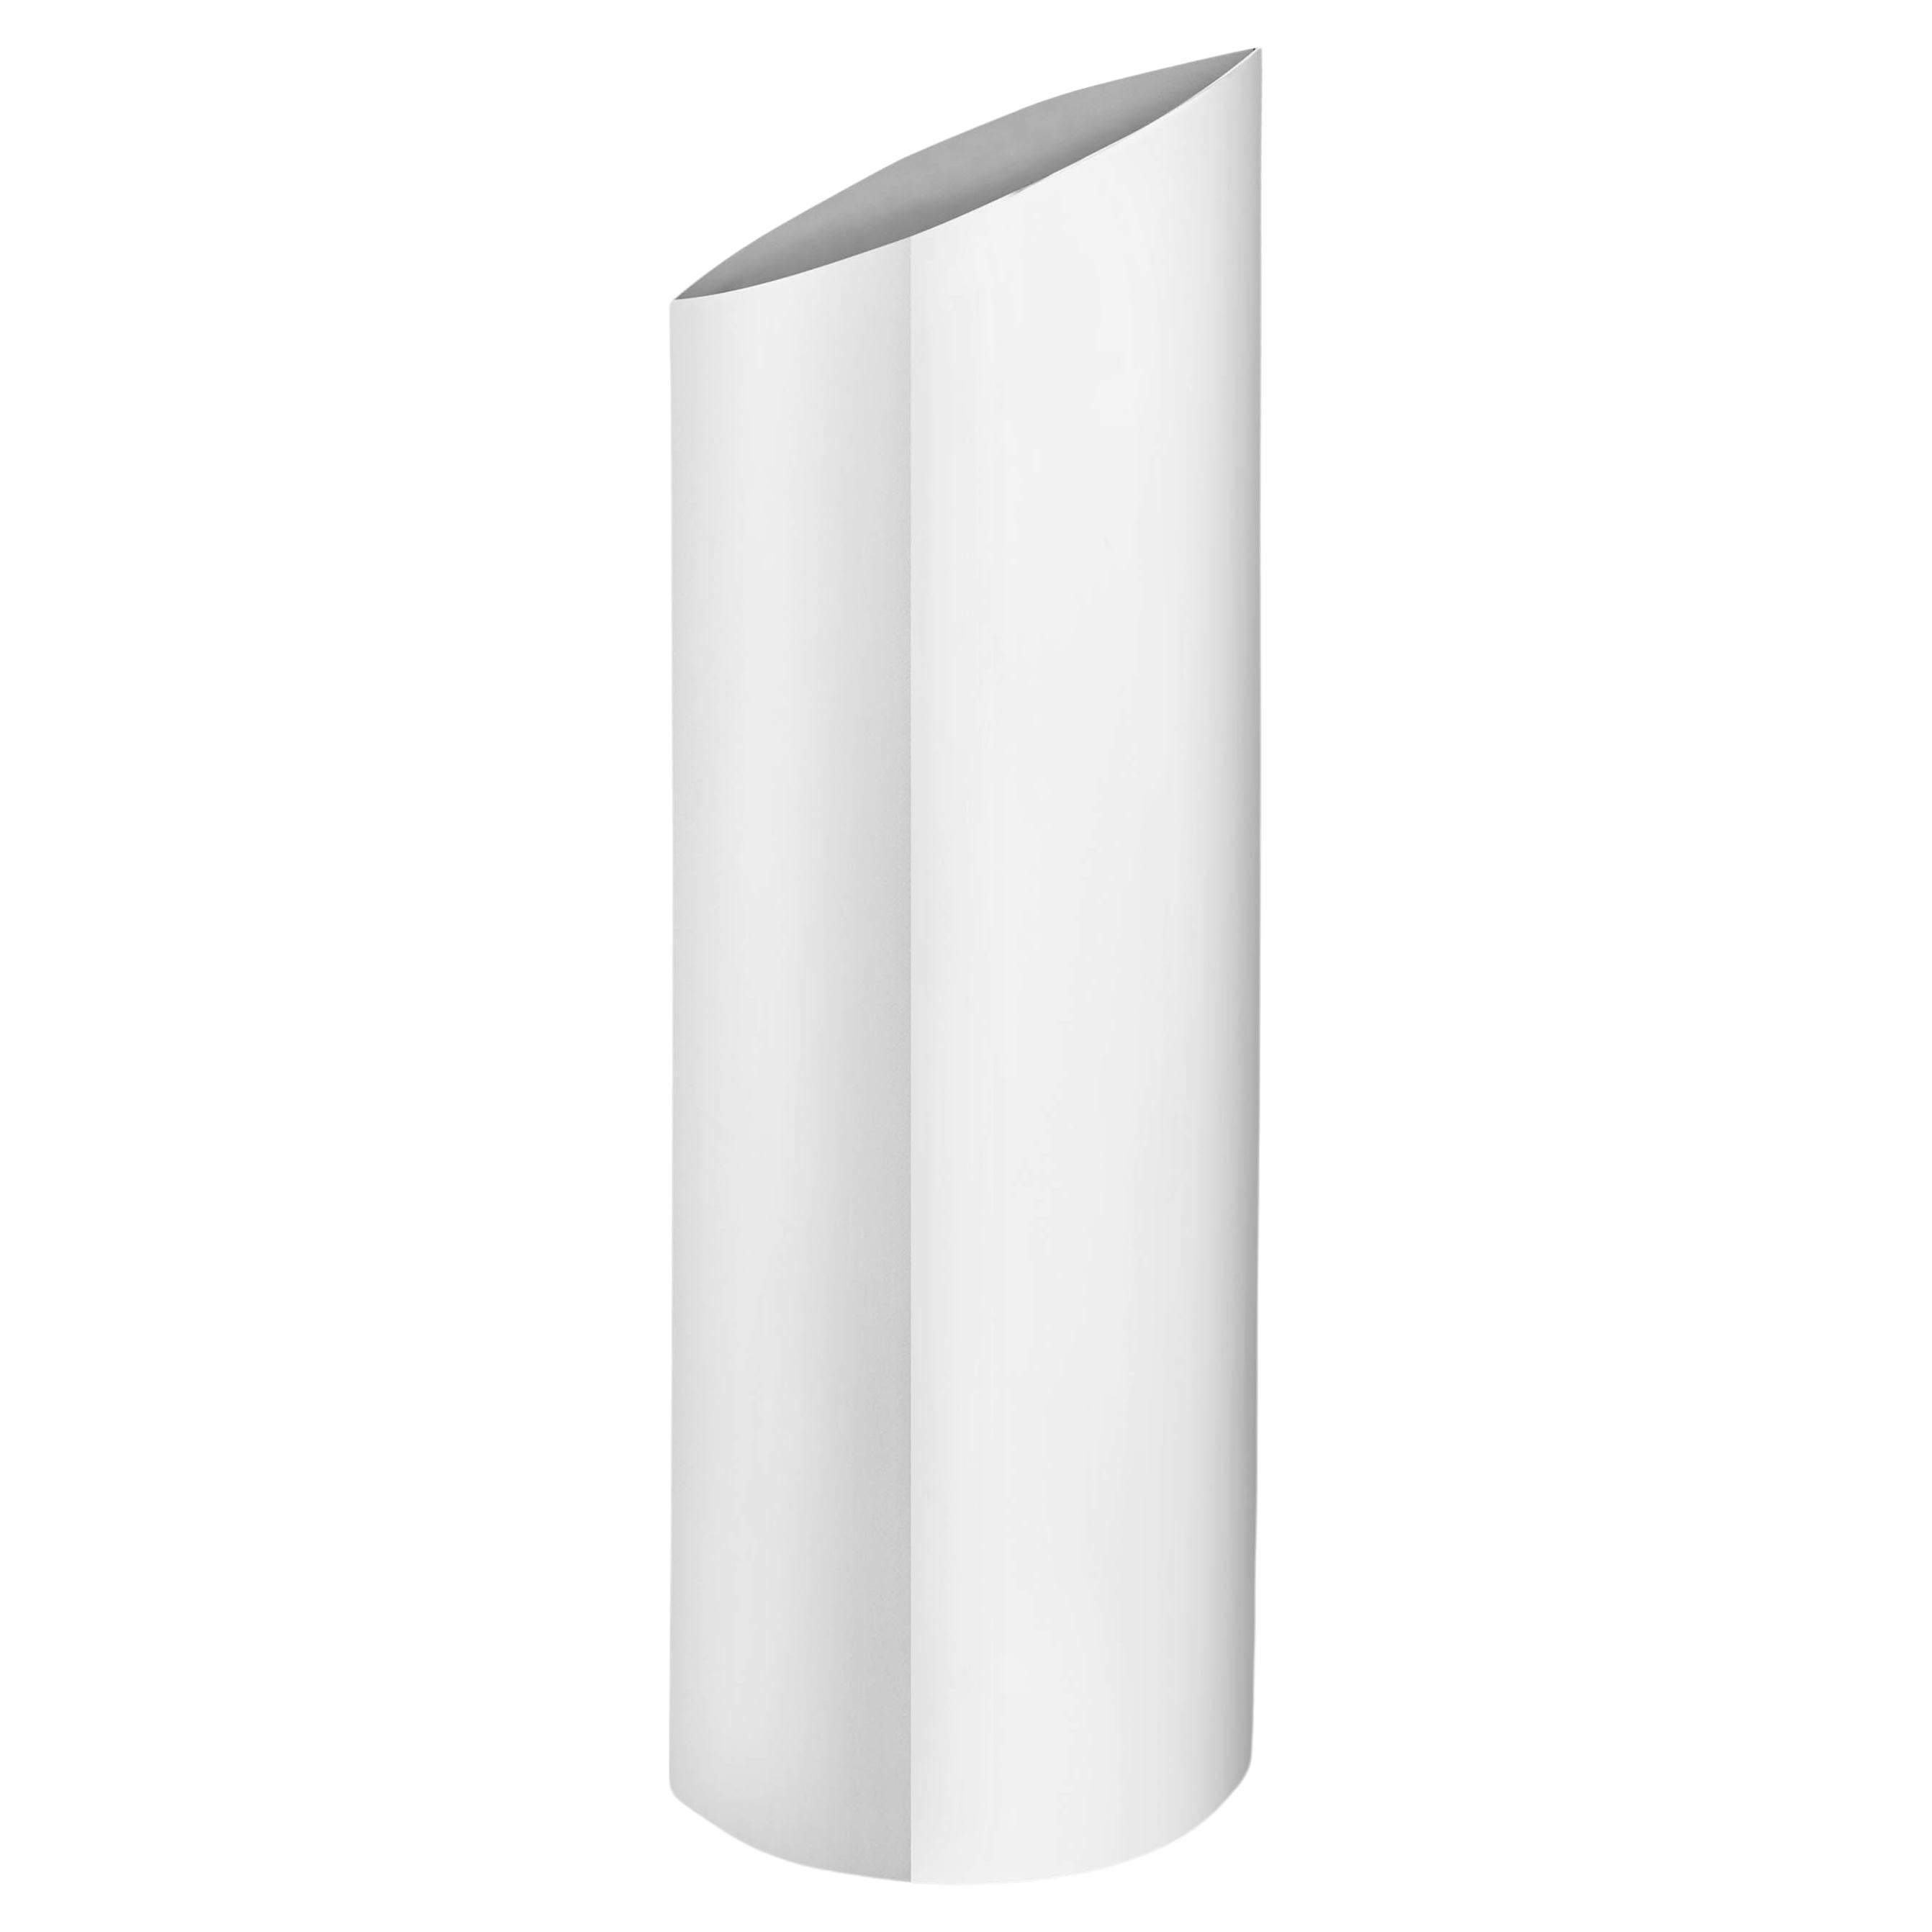 Contemporary Vase, 'Parova L60' by Zieta, Stainless Steel For Sale